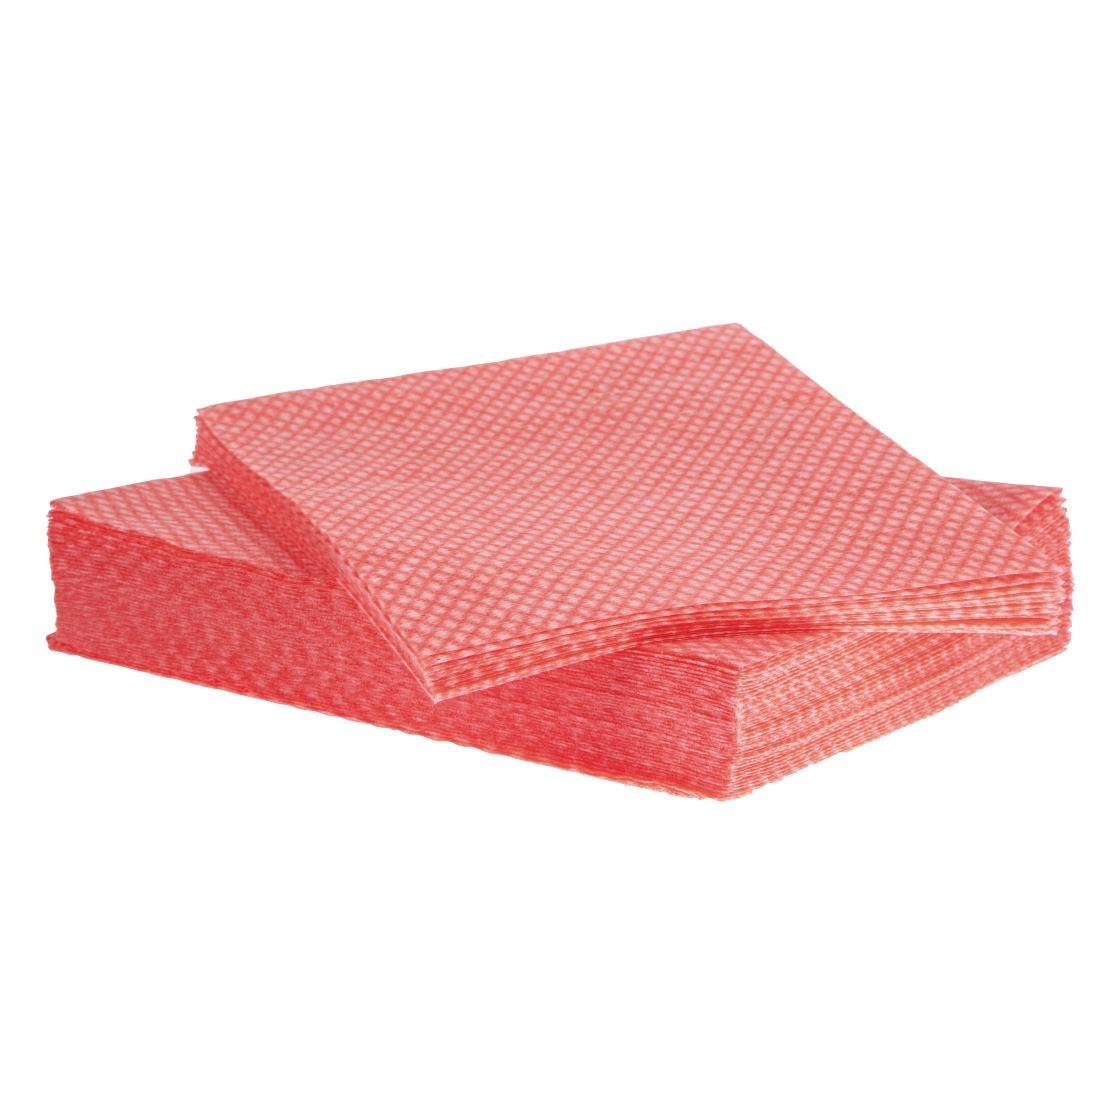 Jantex Solonet Cloths Red (Pack of 50) - CD809  - 1